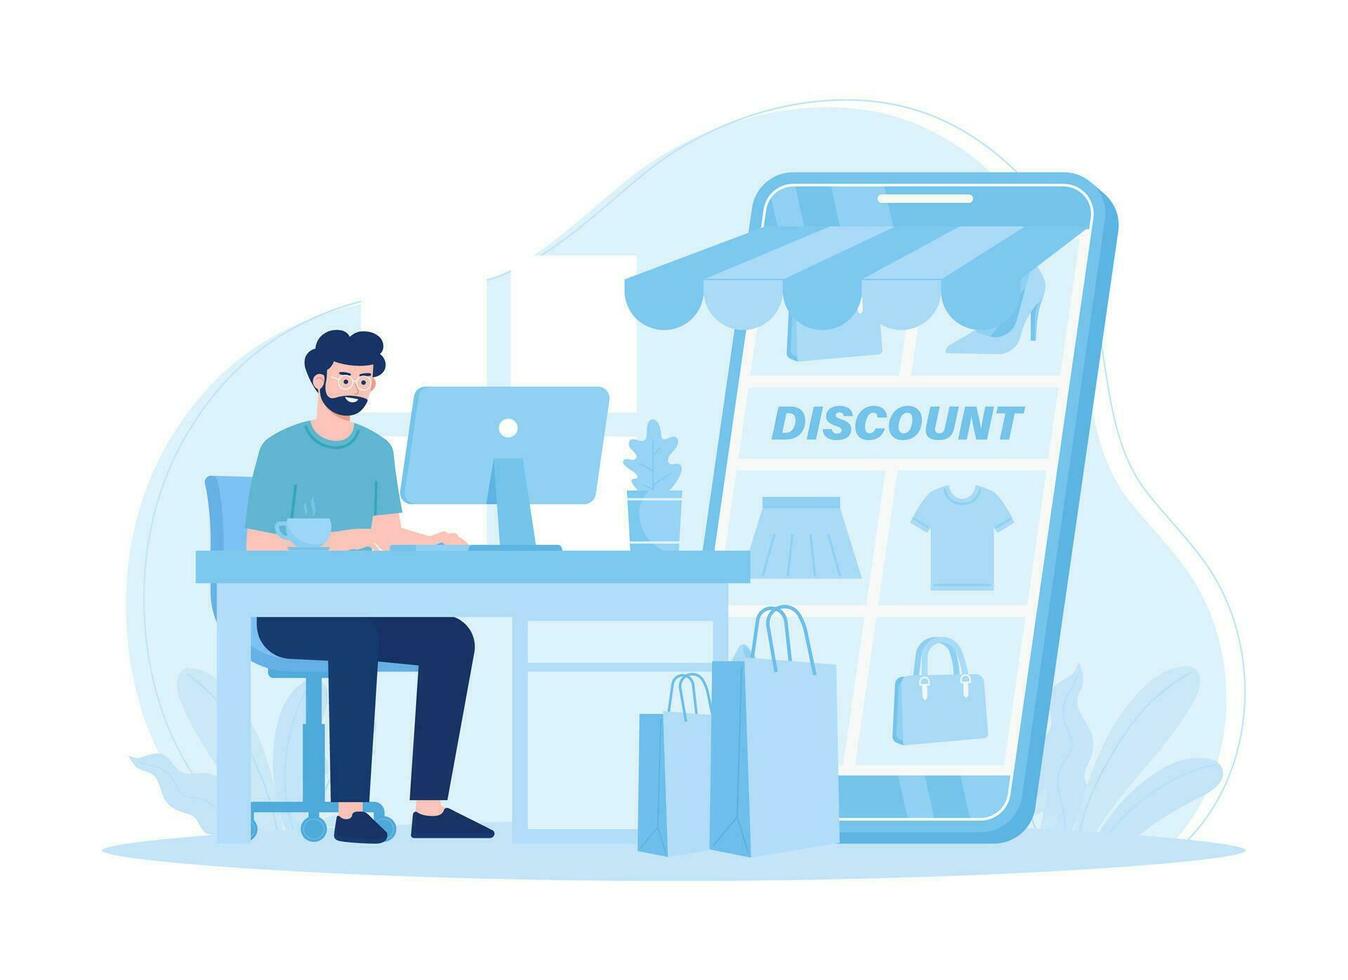 Shop online from home concept flat illustration vector